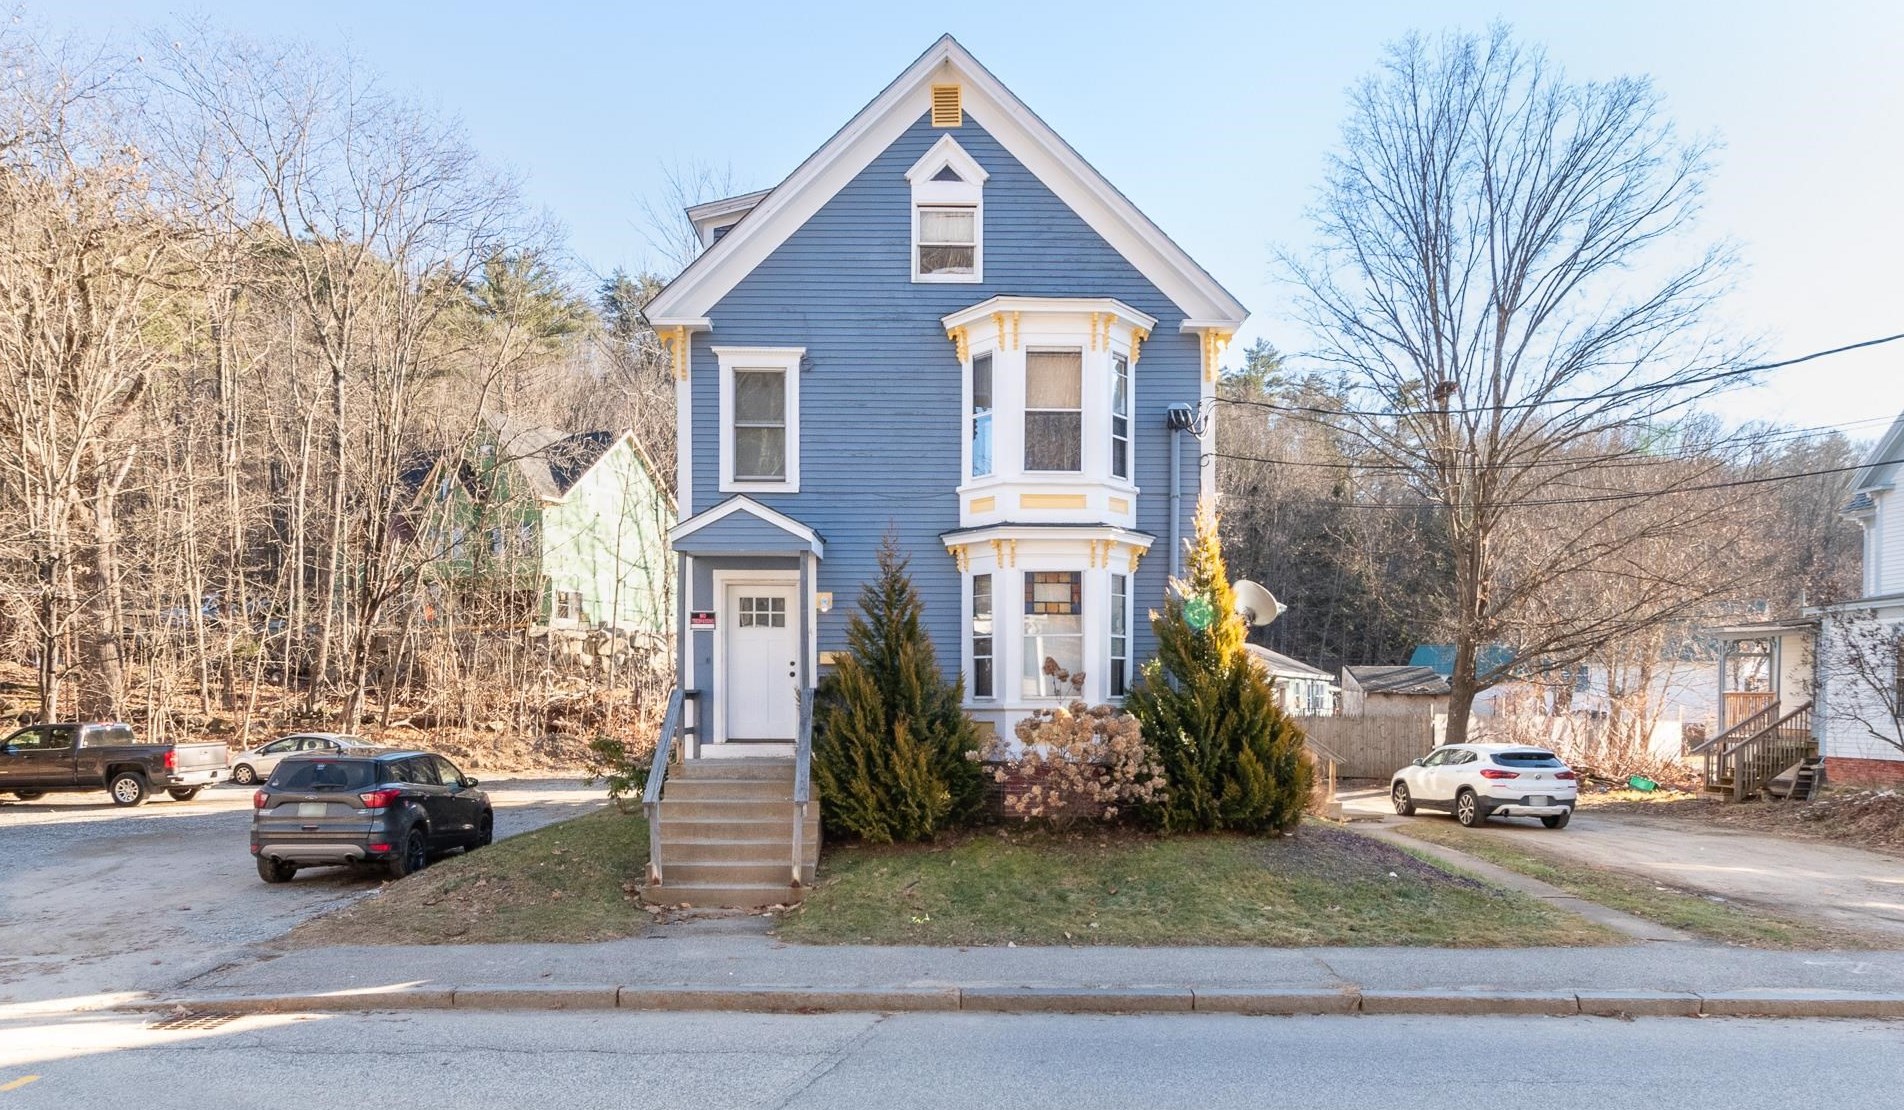 144 Valley St, Laconia, NH 03246